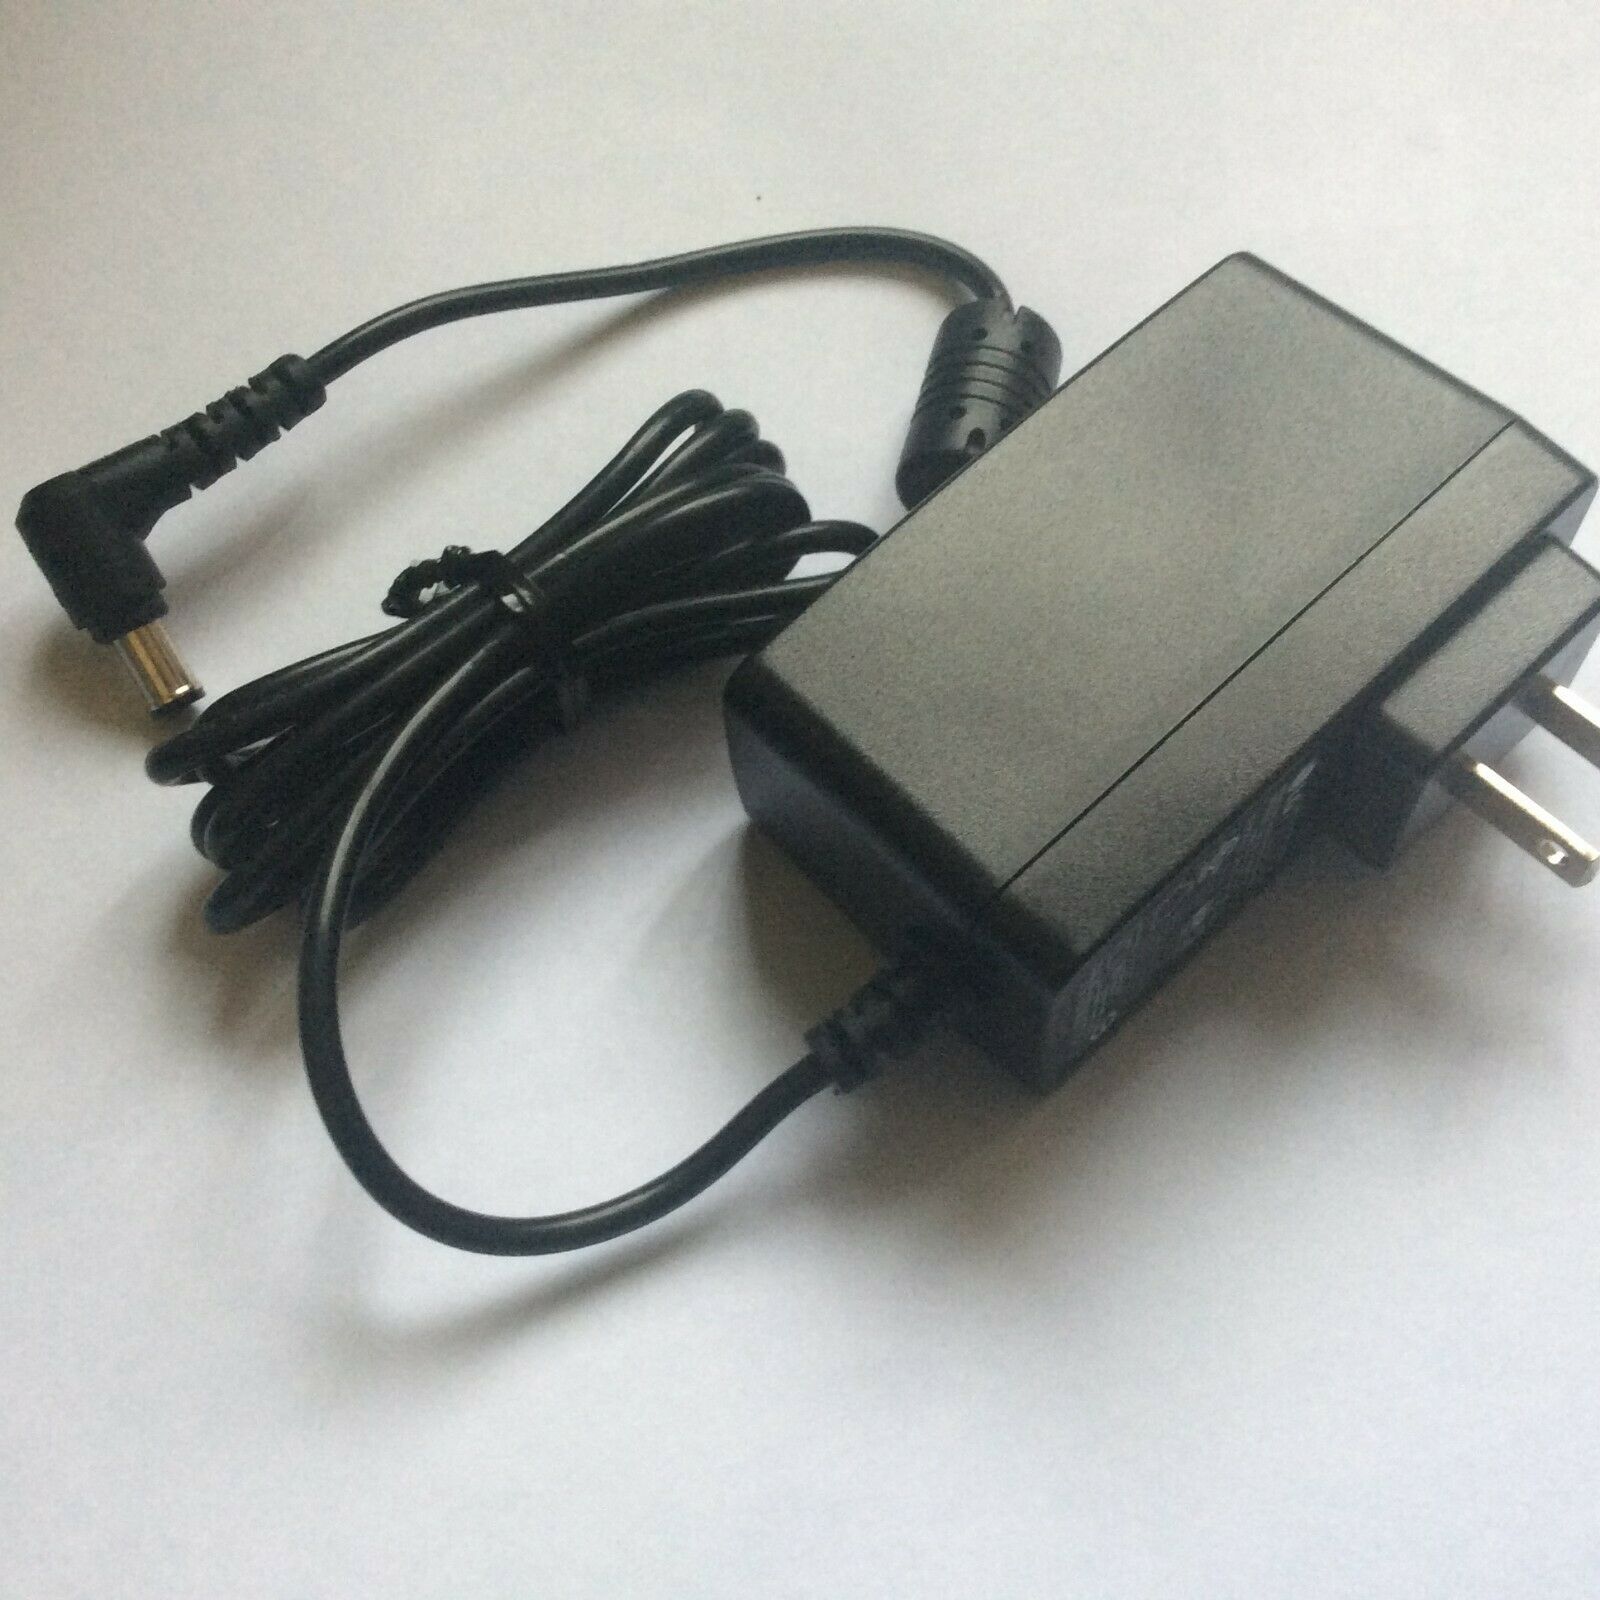 FOR 3Com US Robotics Print Server AC ADAPTER CHARGER DC replace SUPPLY CORD Brand: T Power Type: AC/DC adapter Wall - Click Image to Close